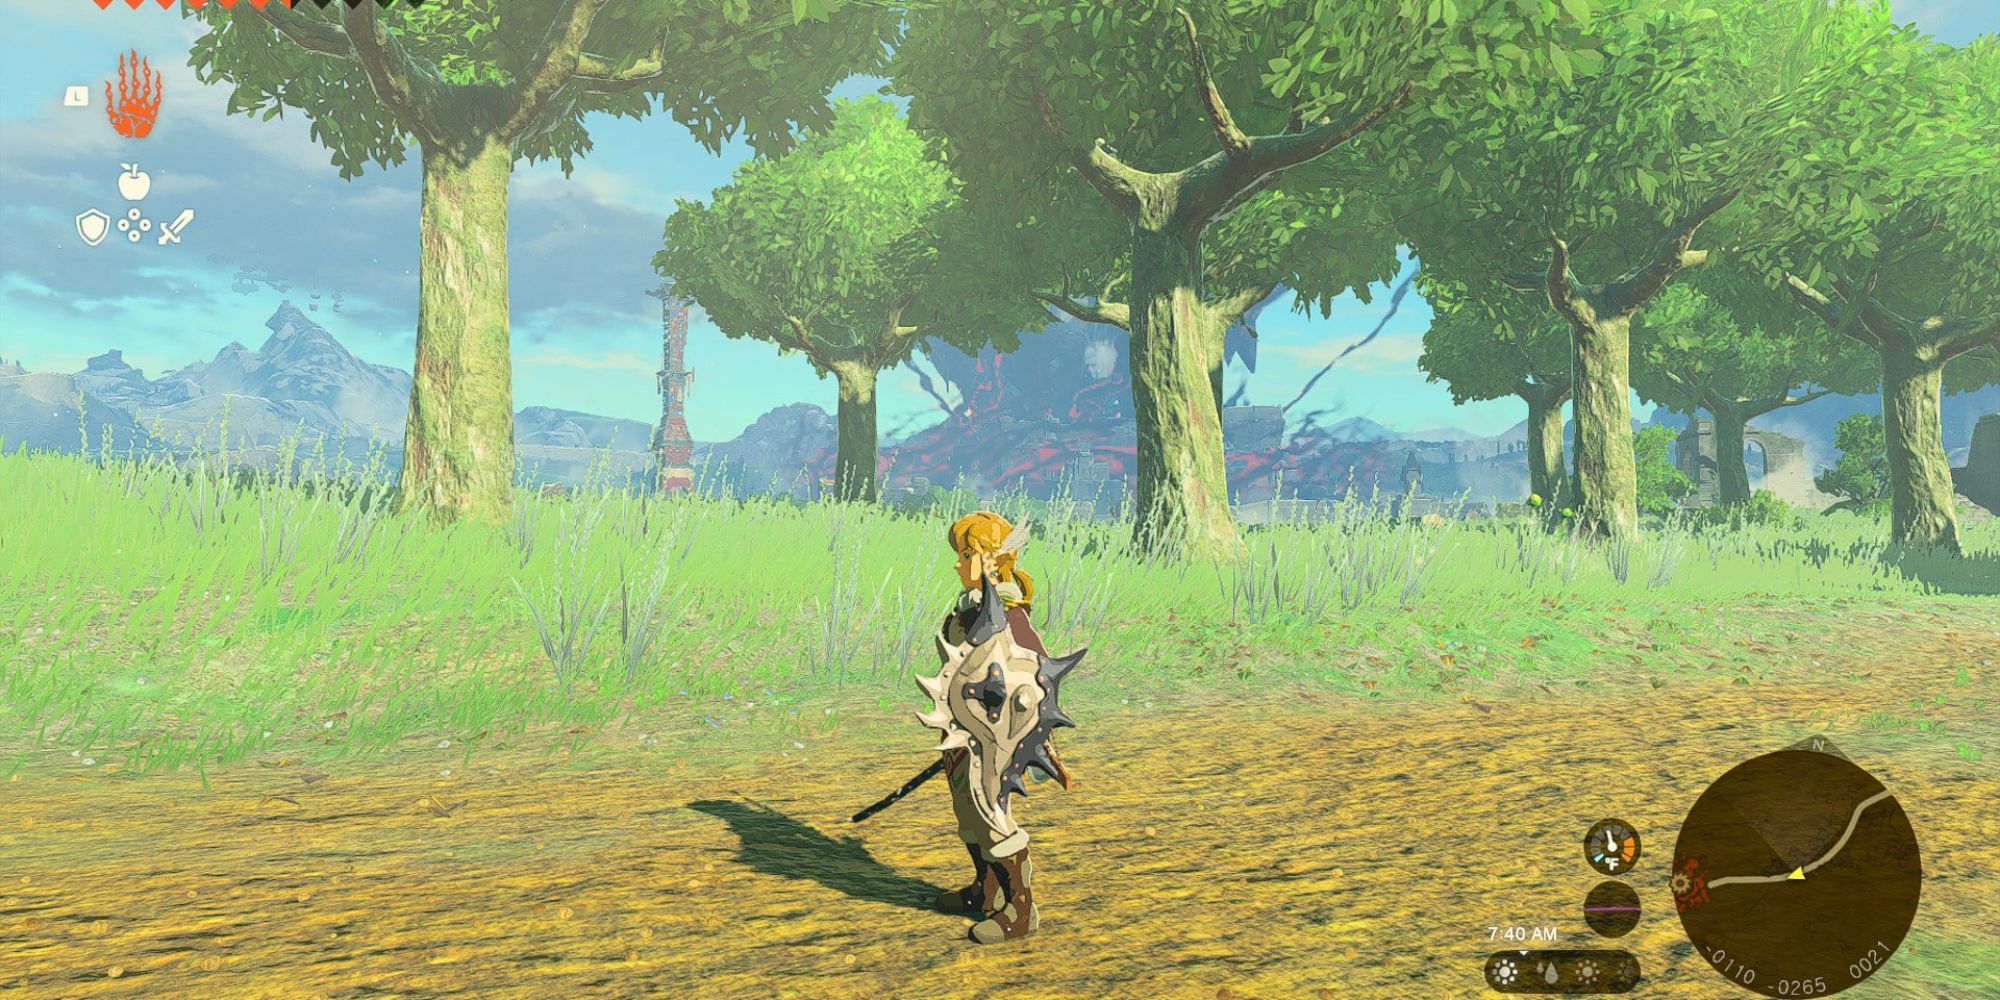 link standing in a field with his shield